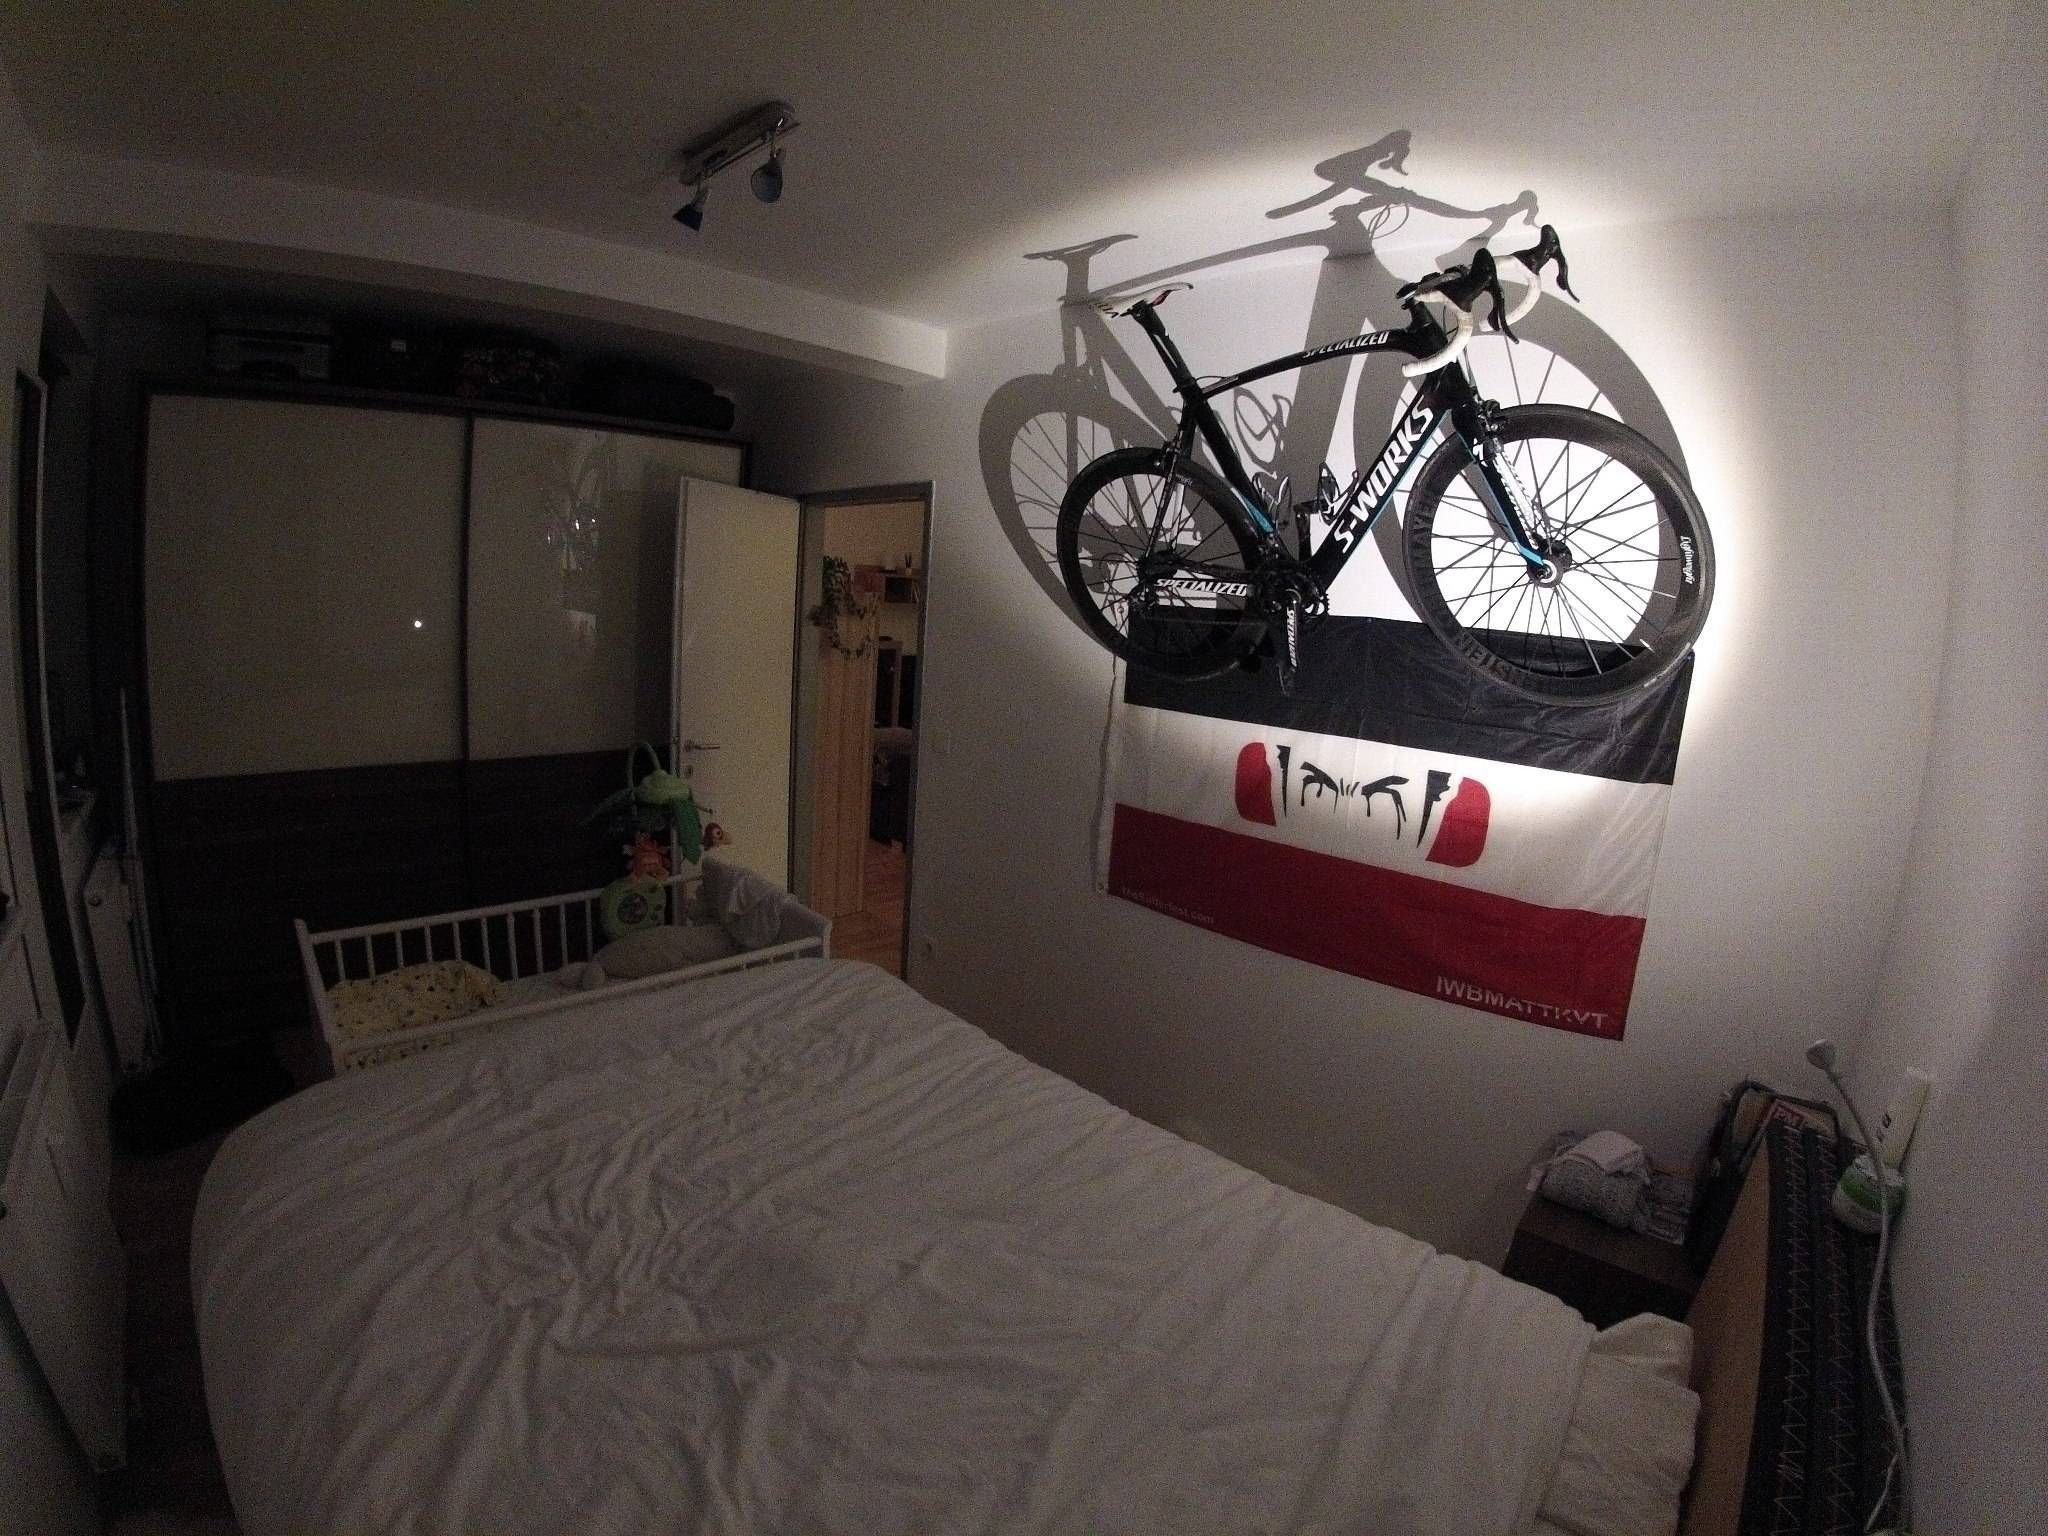 Another Bike As Wall Art : Bicycling Throughout Best And Newest Bike Wall Art (View 13 of 20)